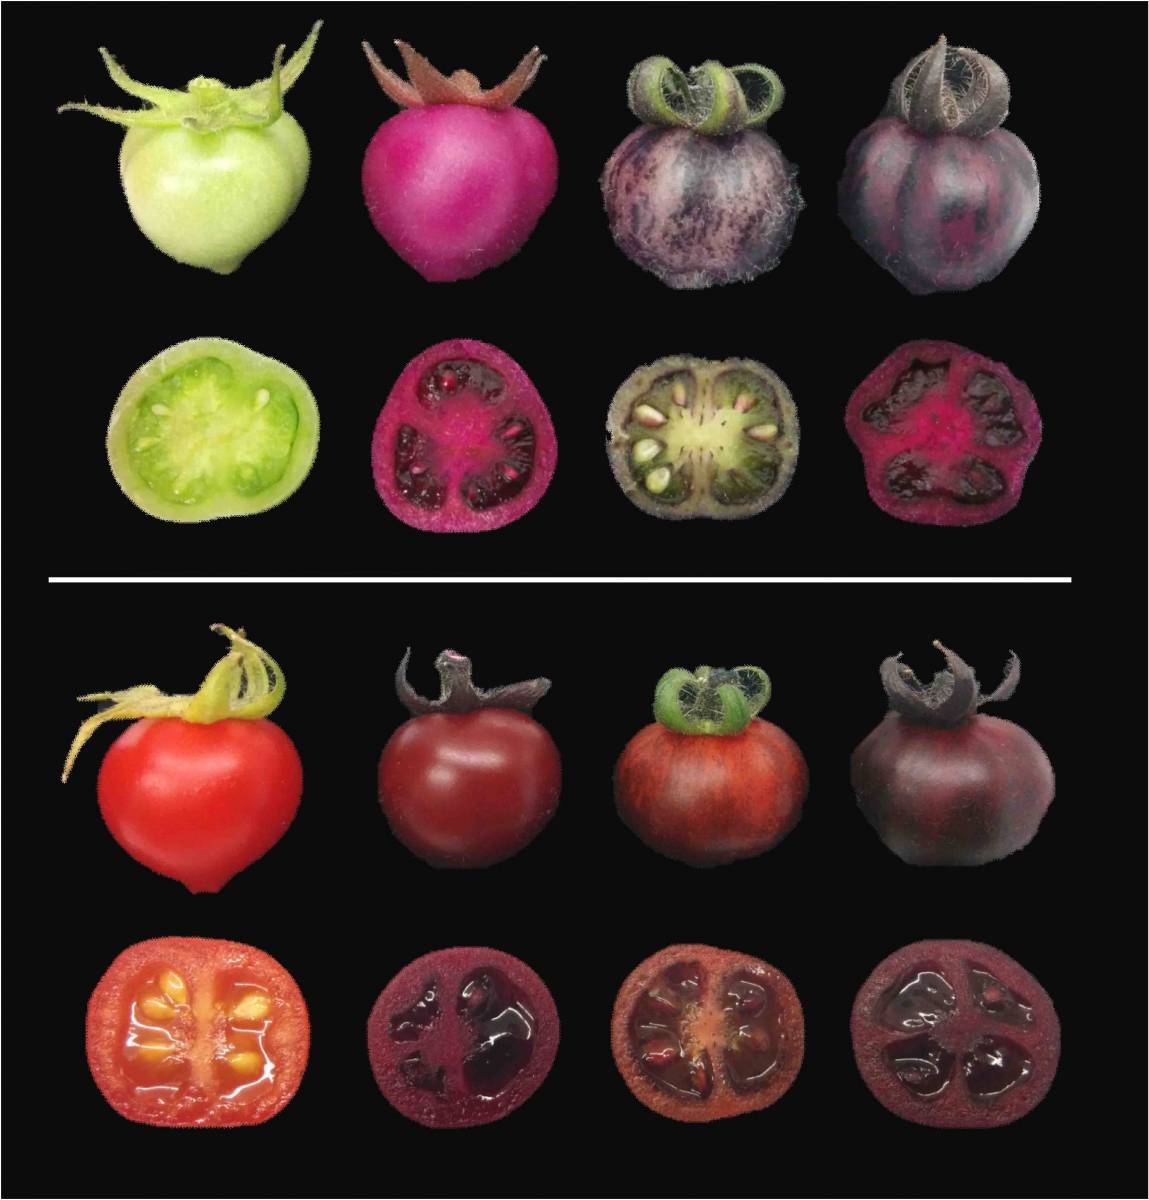 Unripe (top) and ripe (bottom) tomatoes. Regular tomatoes (far left) start out green and turn red when ripe. In contrast, genetically engineered tomatoes assume different shades of red-violet, depending on whether they produce betalains (second from left), pigments called anthocyanins (second from right) or betalains together with anthocyanins (far right). Courtesy of the Weizmann Institute